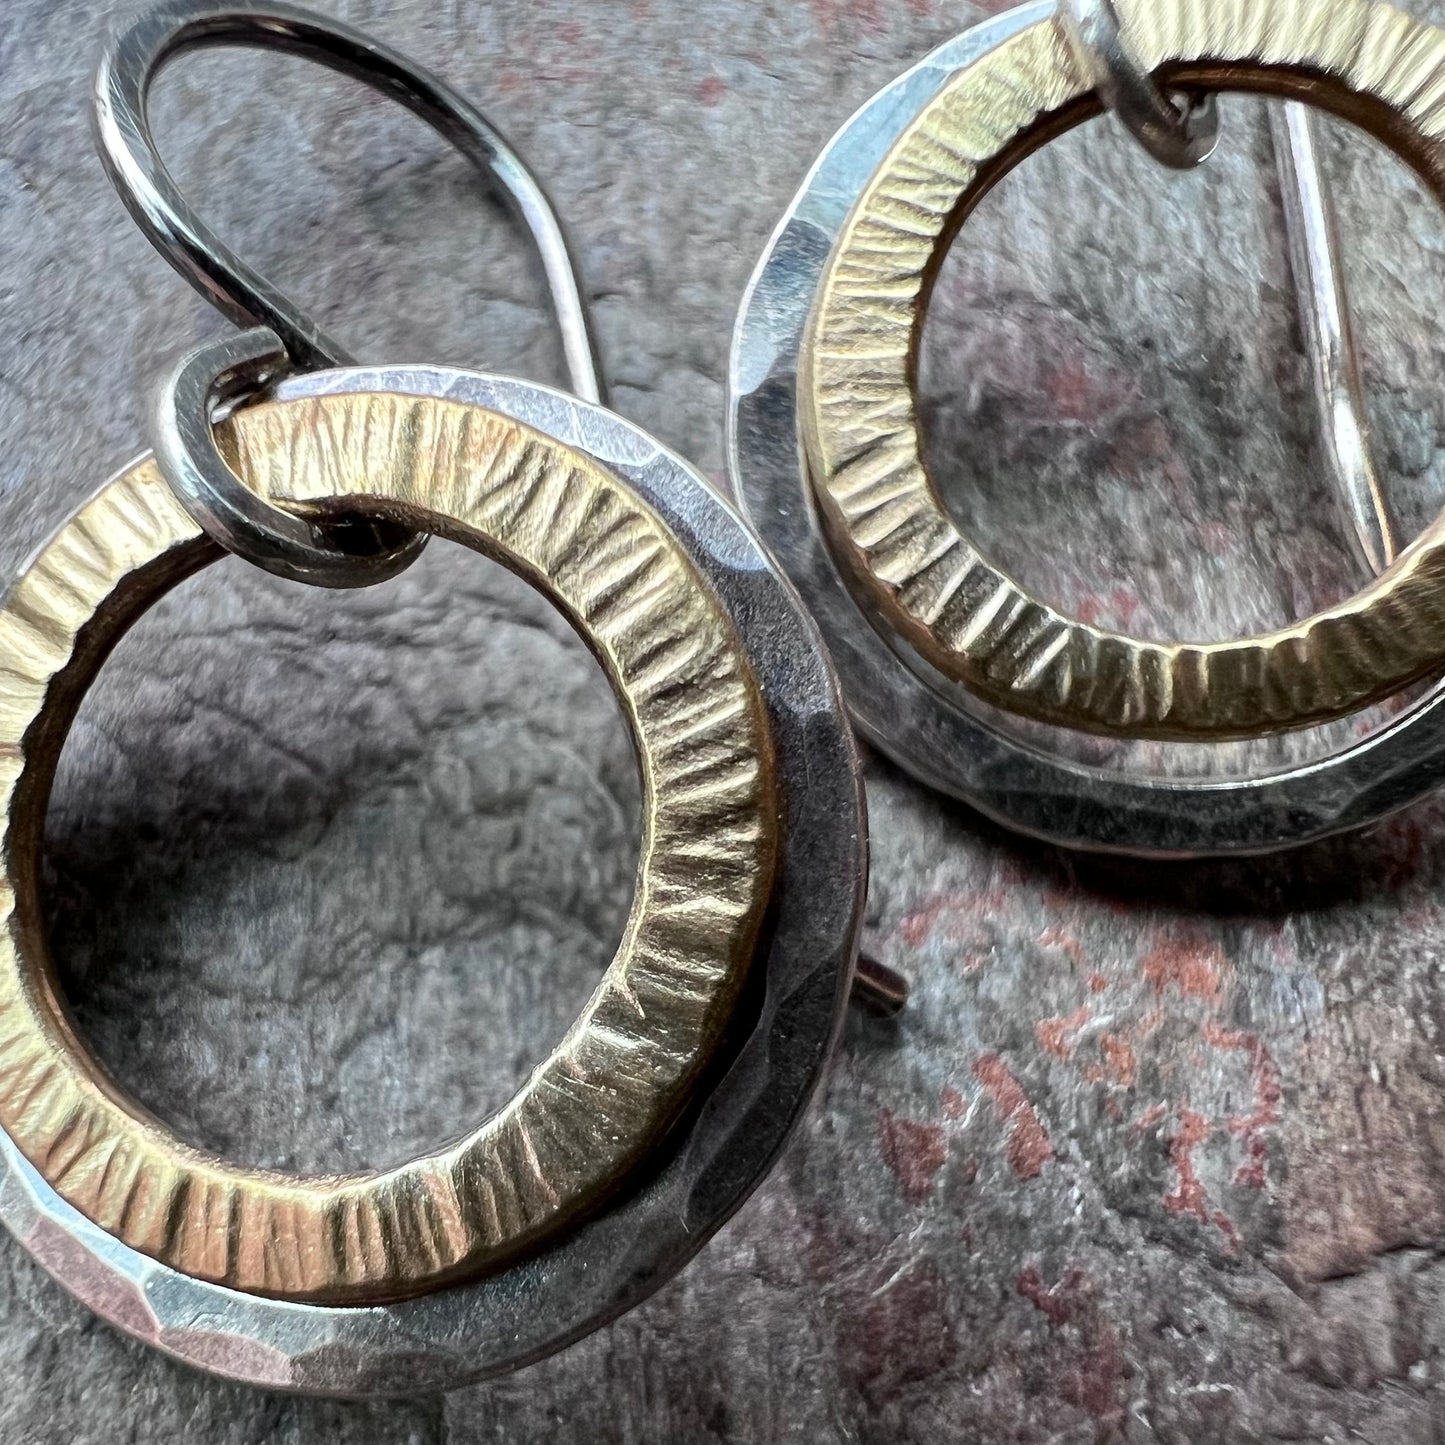 Sterling Silver Mixed Metal Earrings - Hammered Sterling Silver and Brass Earrings